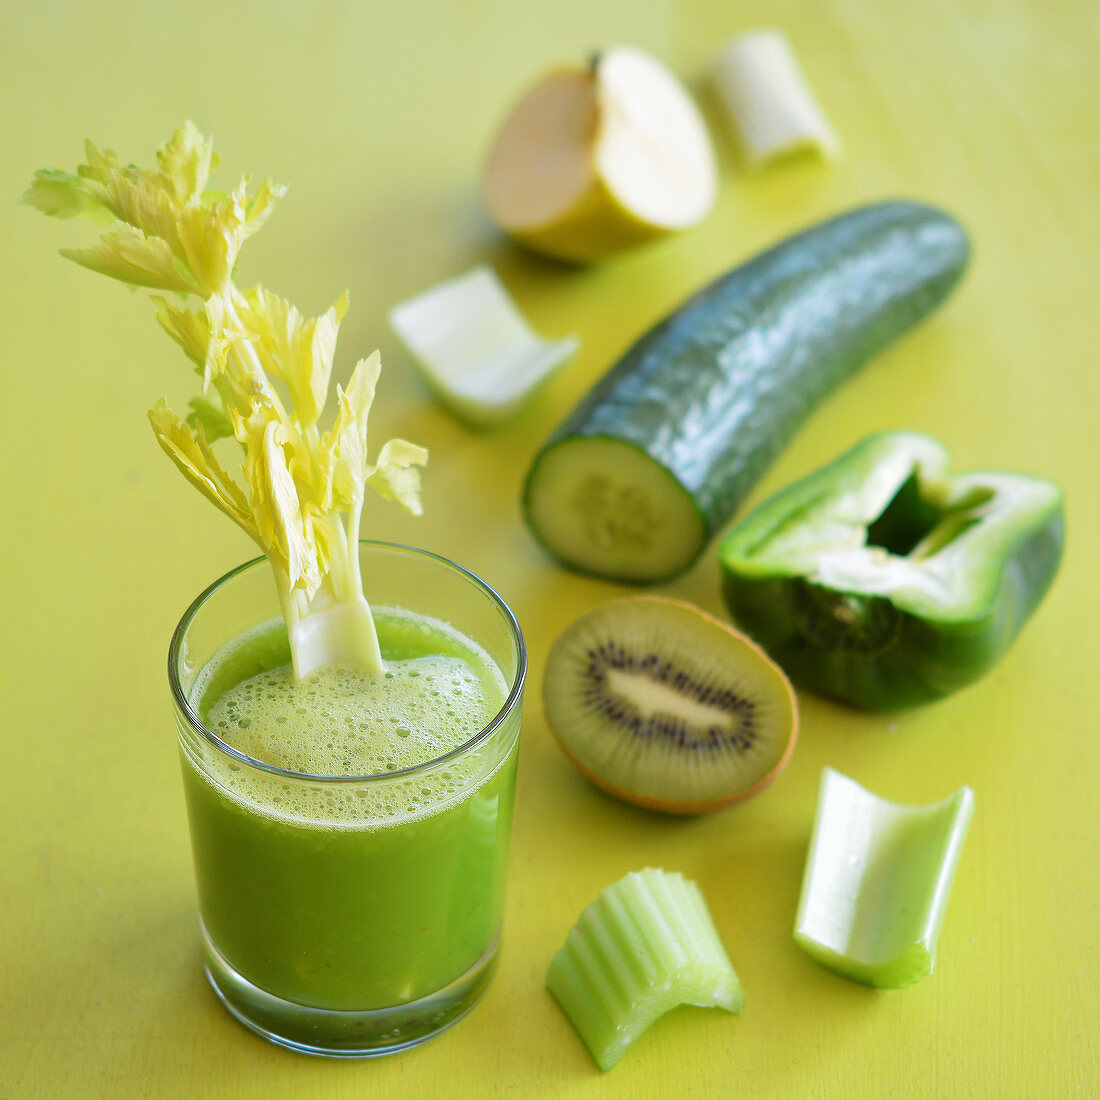 Freshly squeezed green juice from fruit and vegetables